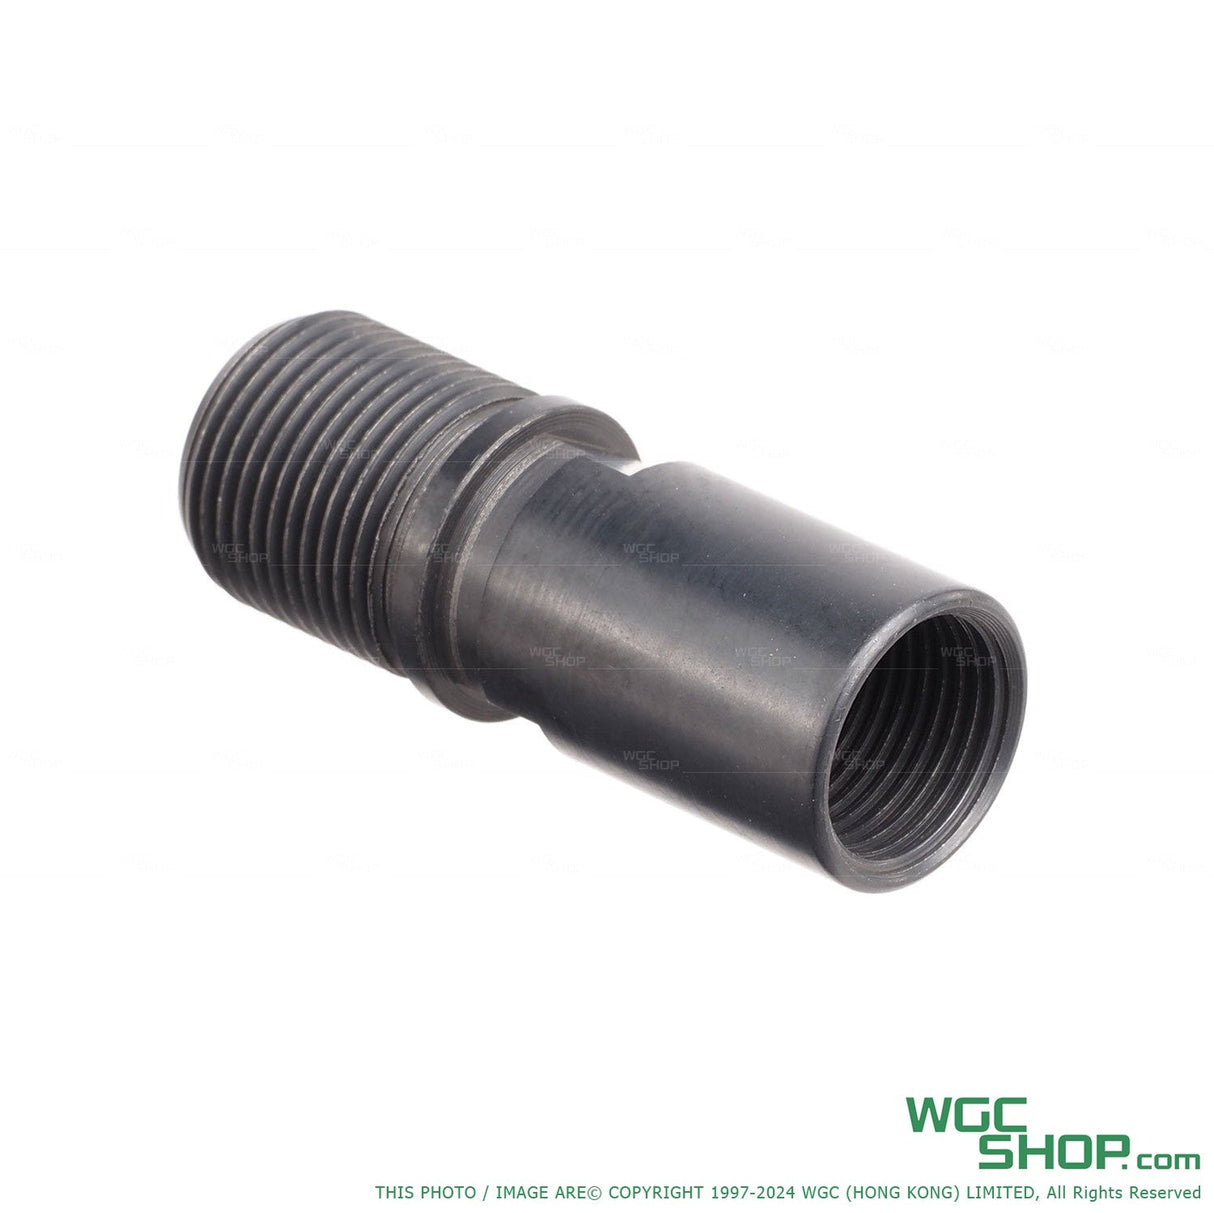 AIRSOFT ARTISAN 14mm CCW Adapter for MARUI / WE MP7 GBB Airsoft